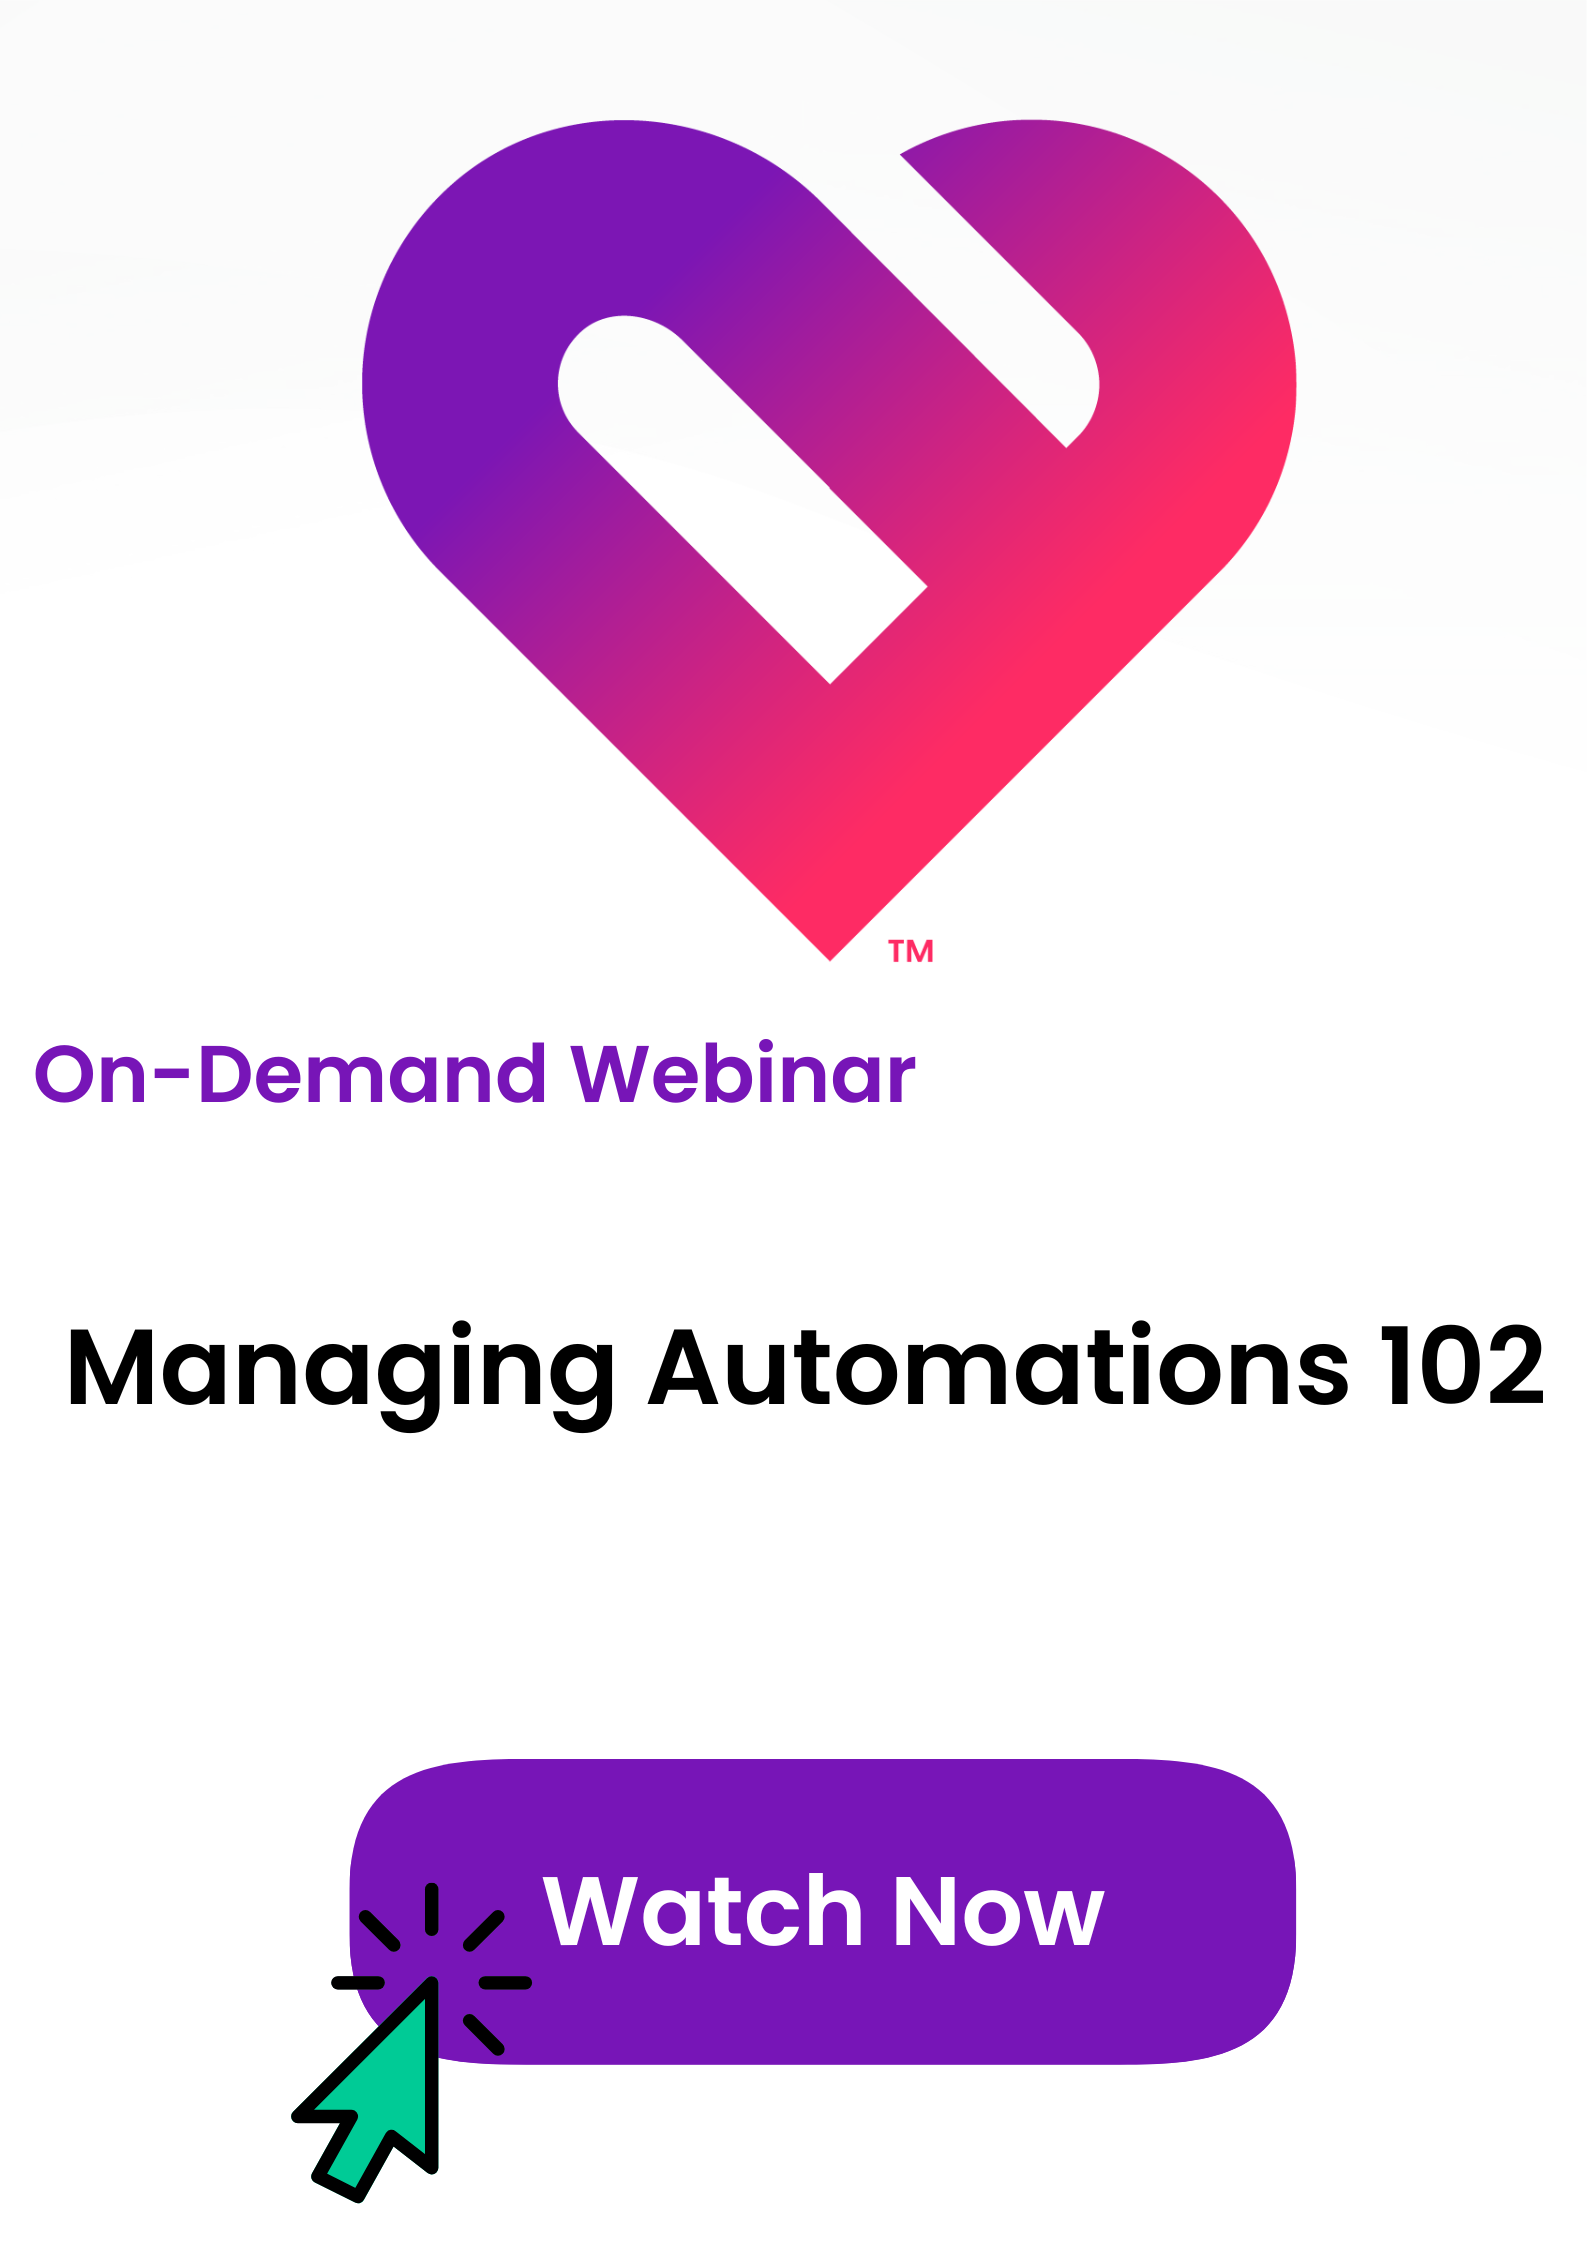 On-demand webinar tile for Automations Management 102, click to watch now